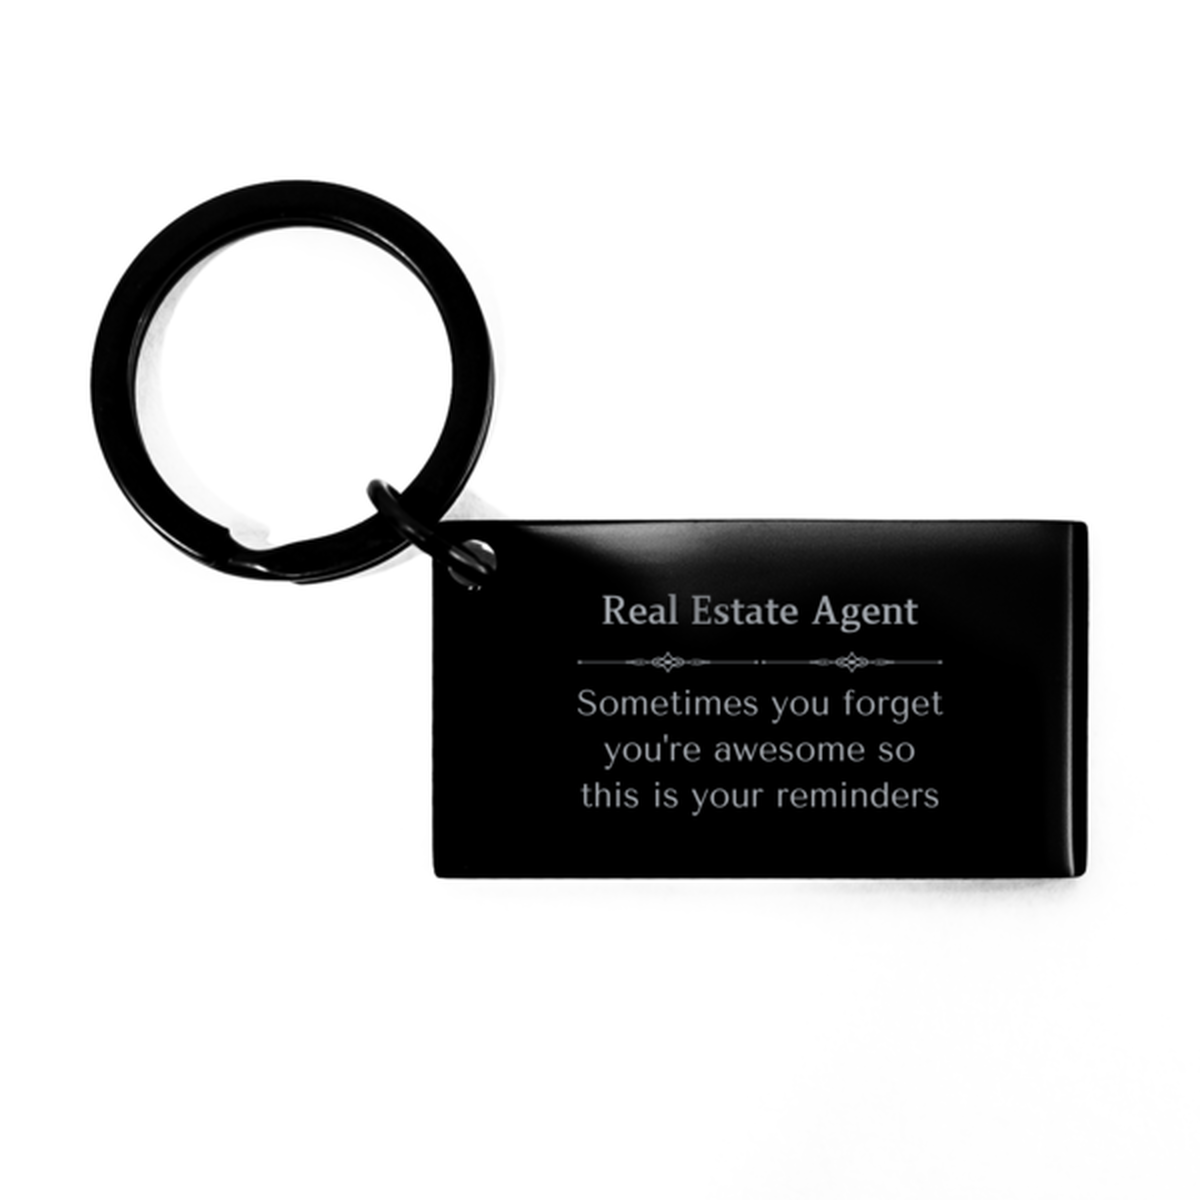 Sentimental Real Estate Agent Keychain, Surveyor Sometimes you forget you're awesome so this is your reminders, Graduation Christmas Birthday Gifts for Real Estate Agent, Men, Women, Coworkers